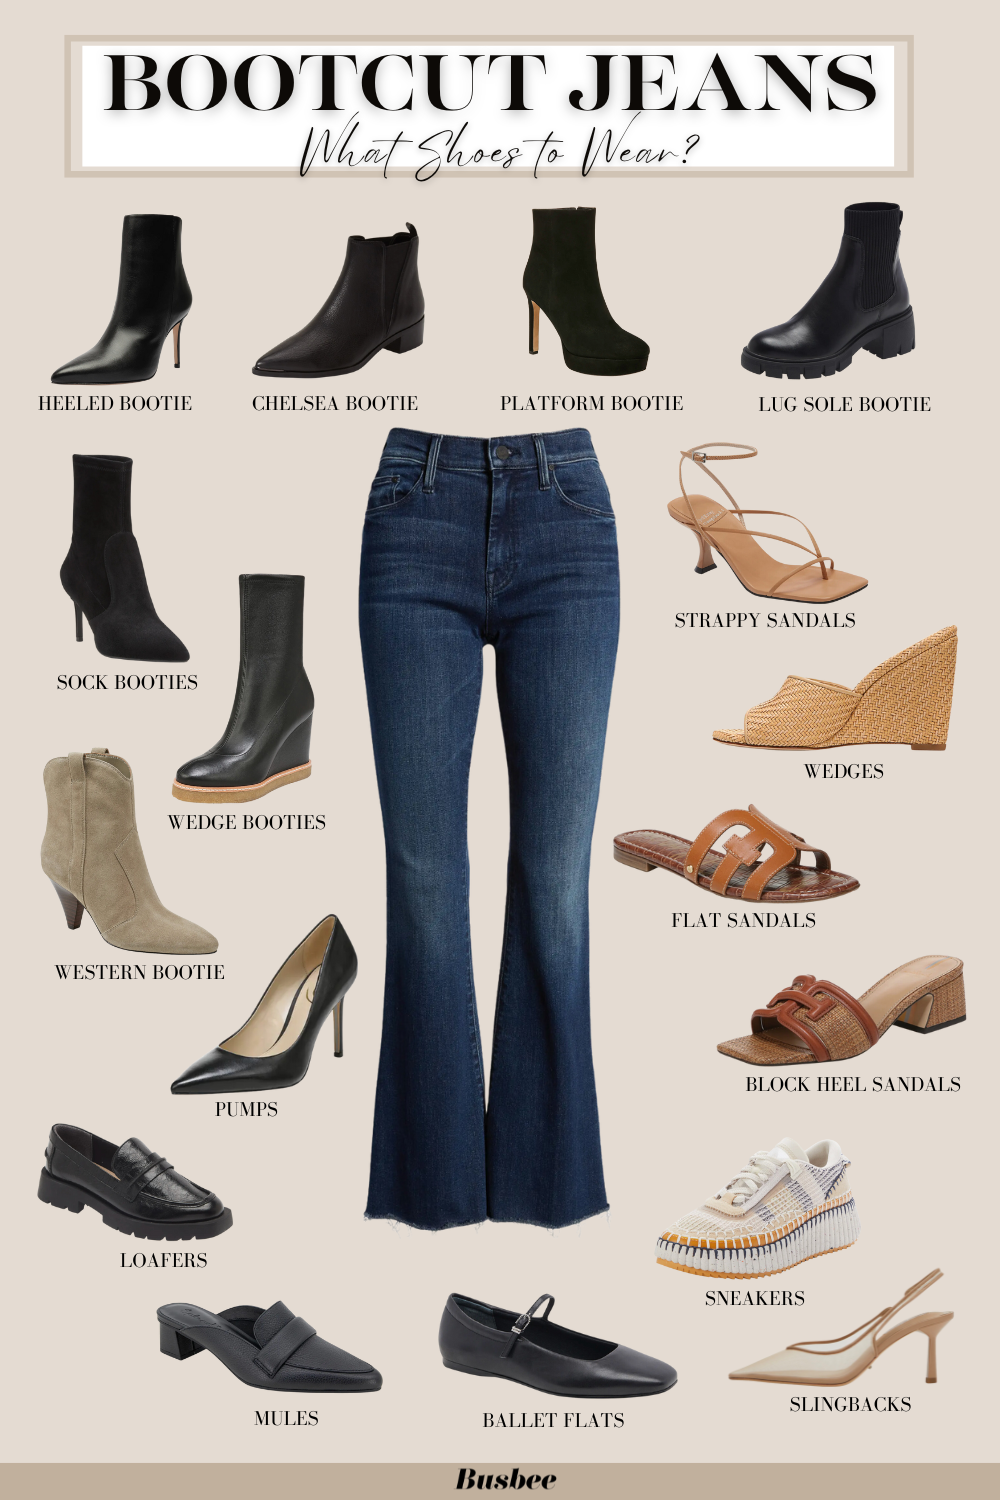 10 Types of Shoes to Wear With Bootcut Jeans